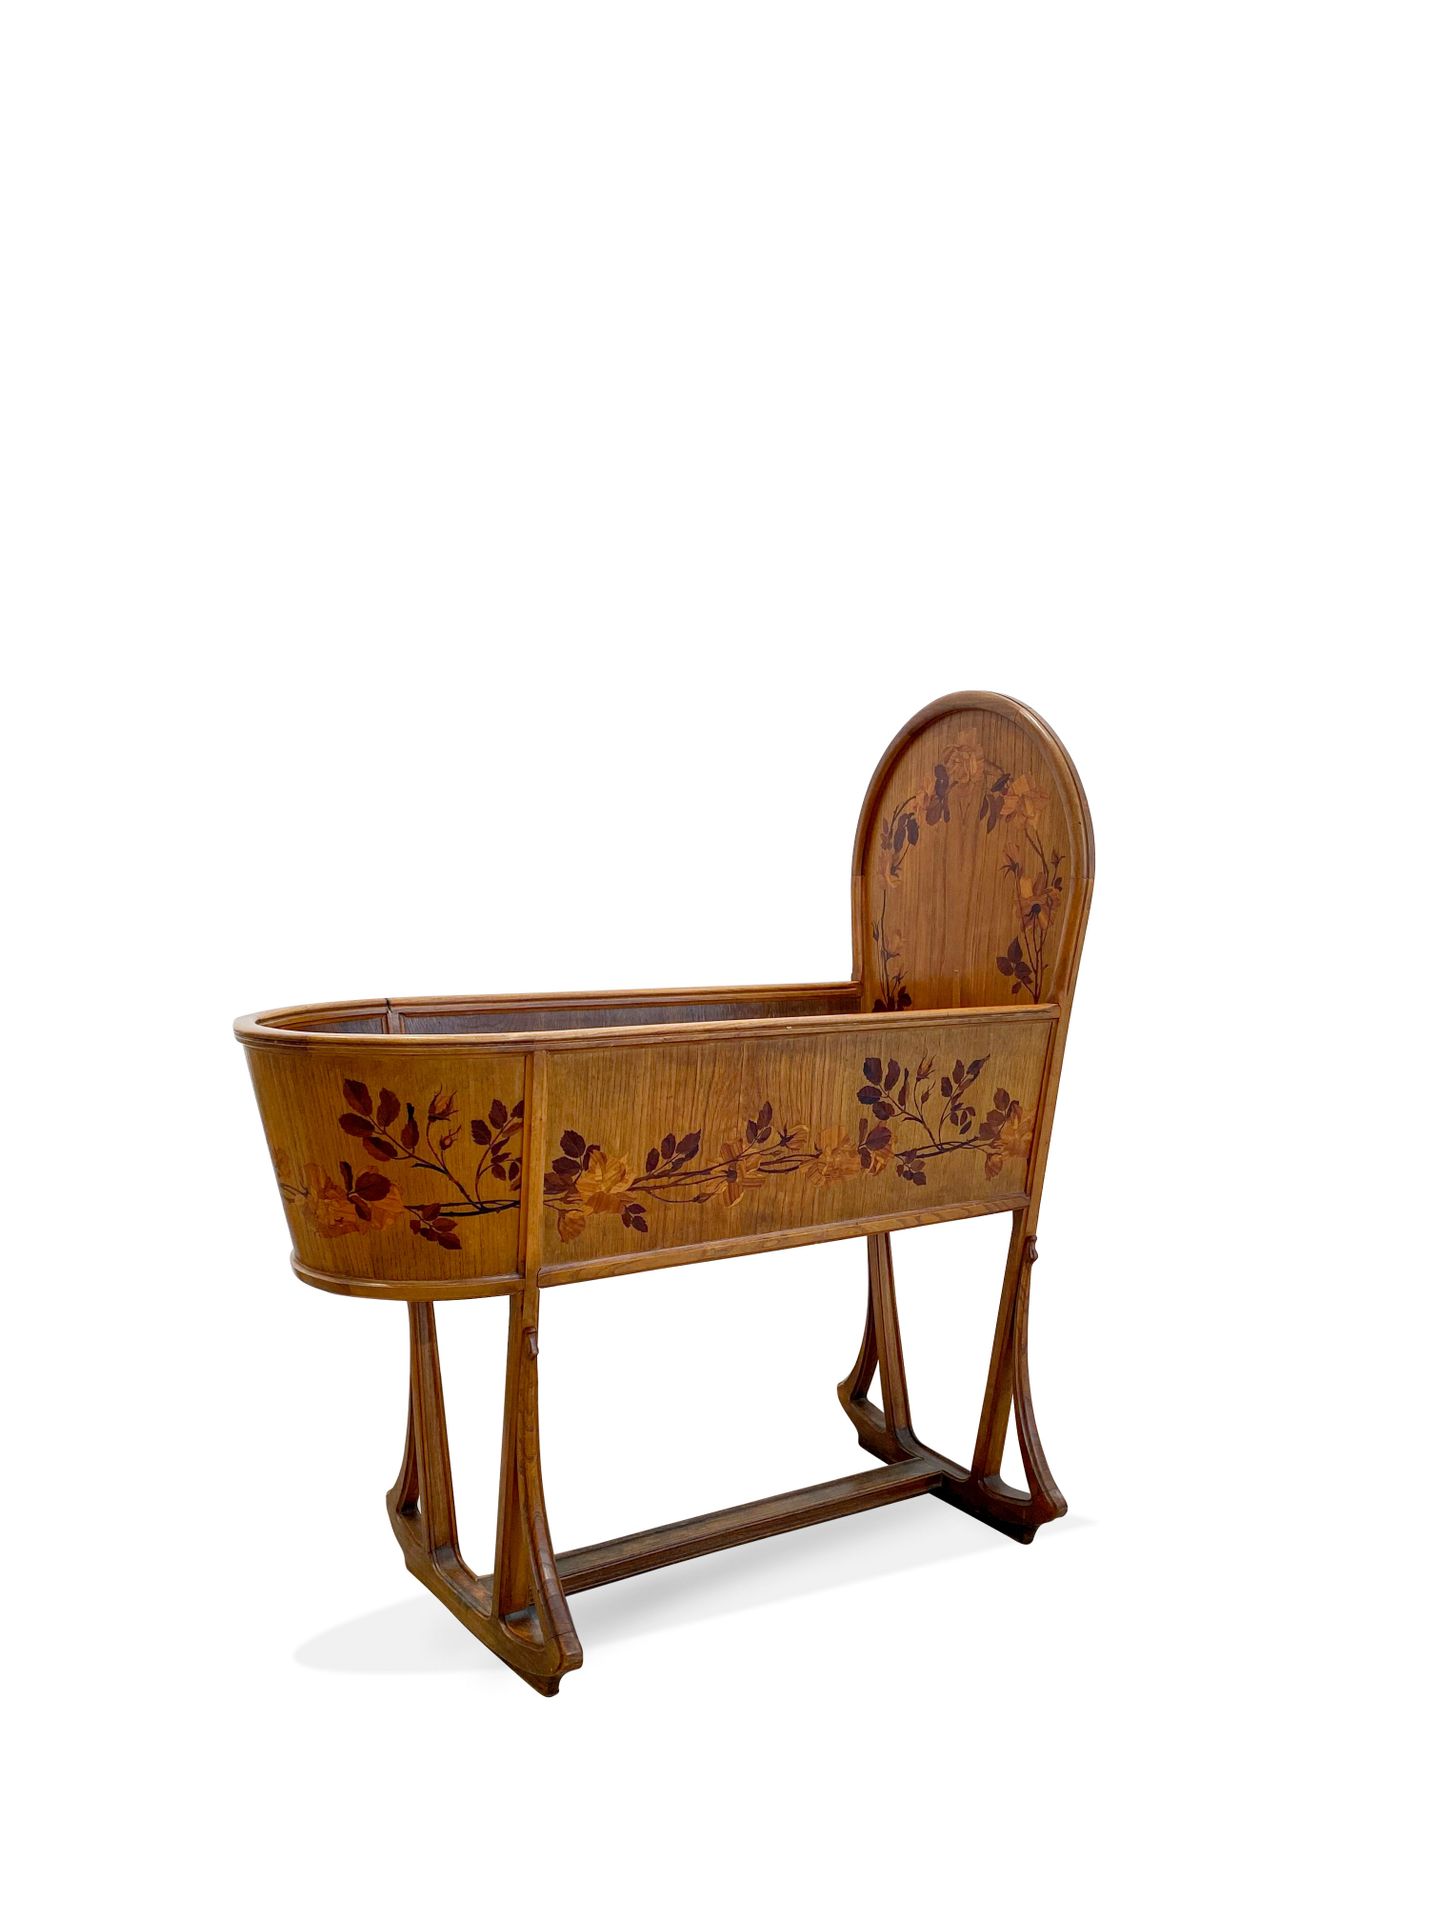 TRAVAIL FRANÇAIS French work Cradle Wooden inlay with floral decoration 131 x 55&hellip;